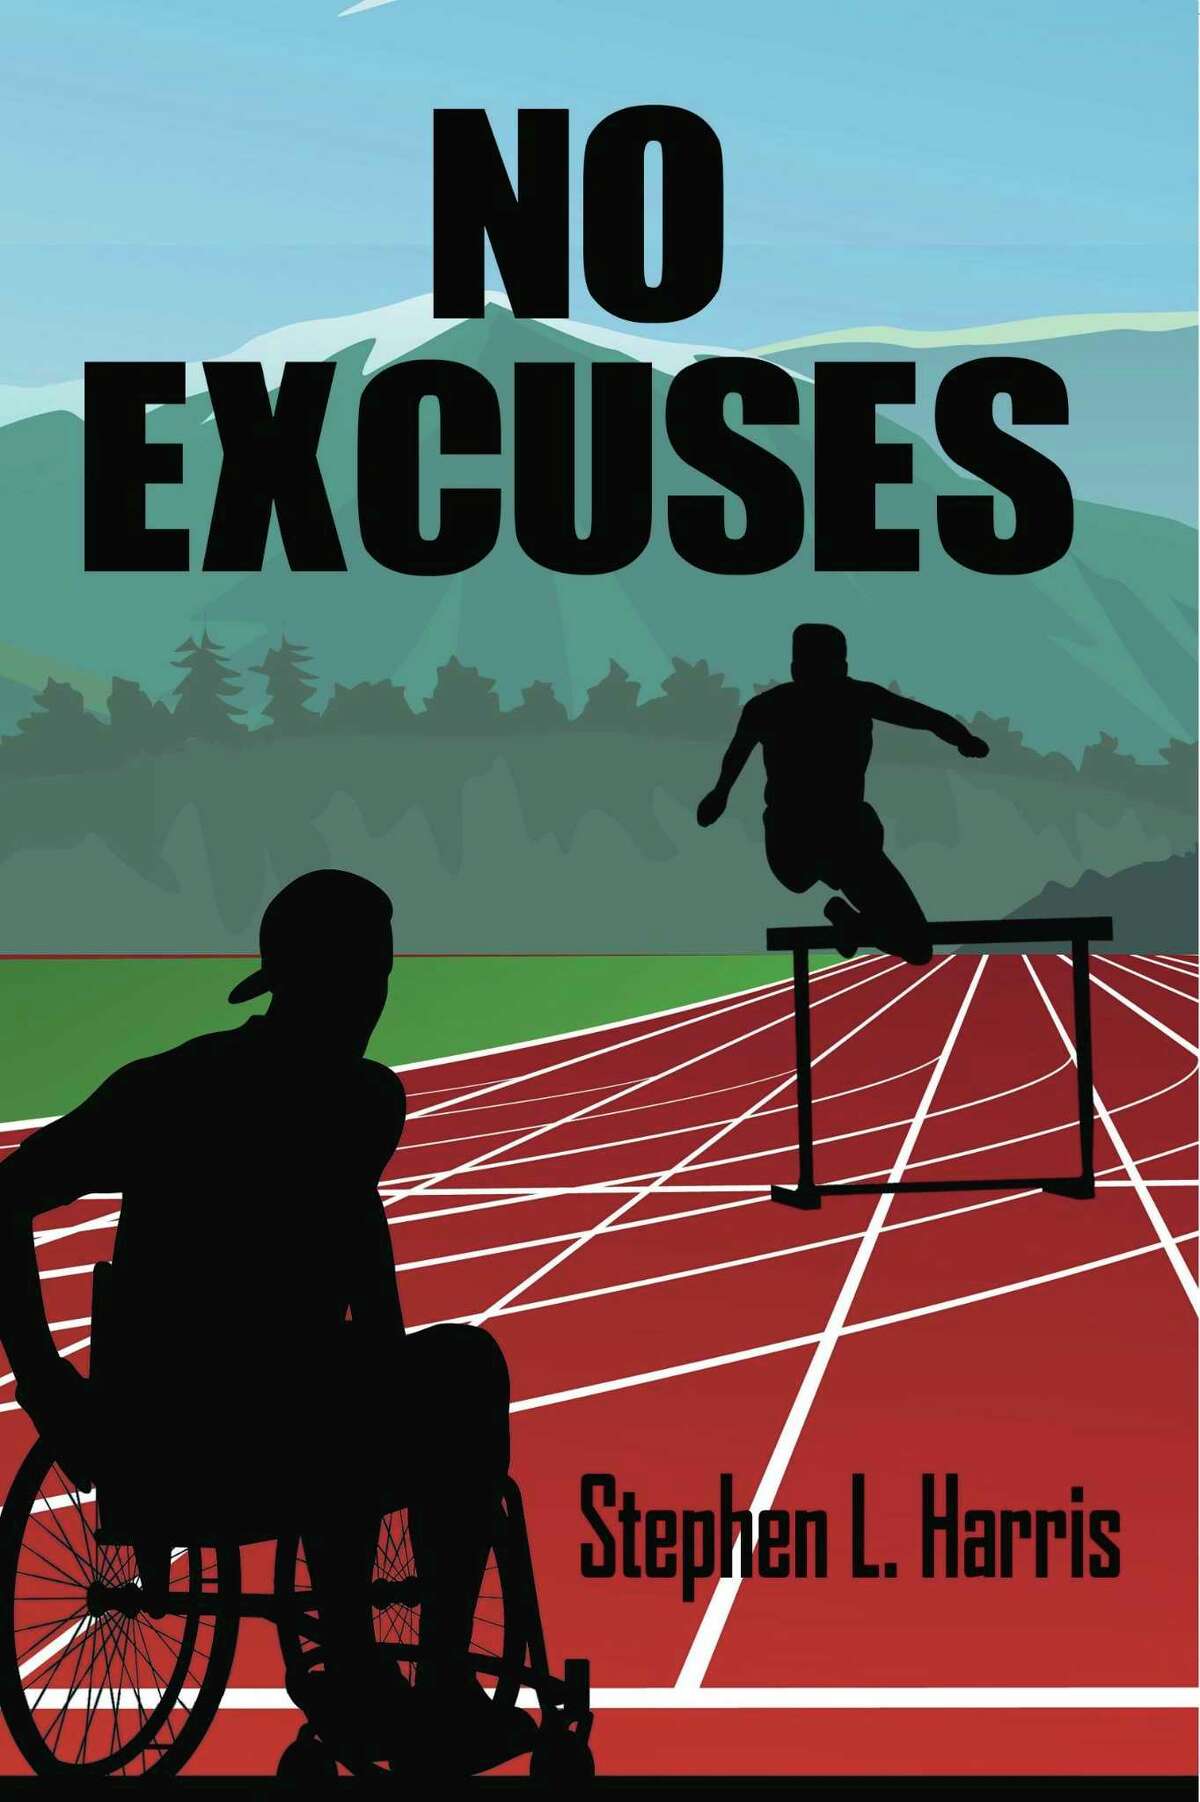 The Rootstock Publishing company has announced a new young adult novel book that is titled “No Excuses,” by author Stephen L. Harris. A photo of a copy of the book cover for the book is shown.